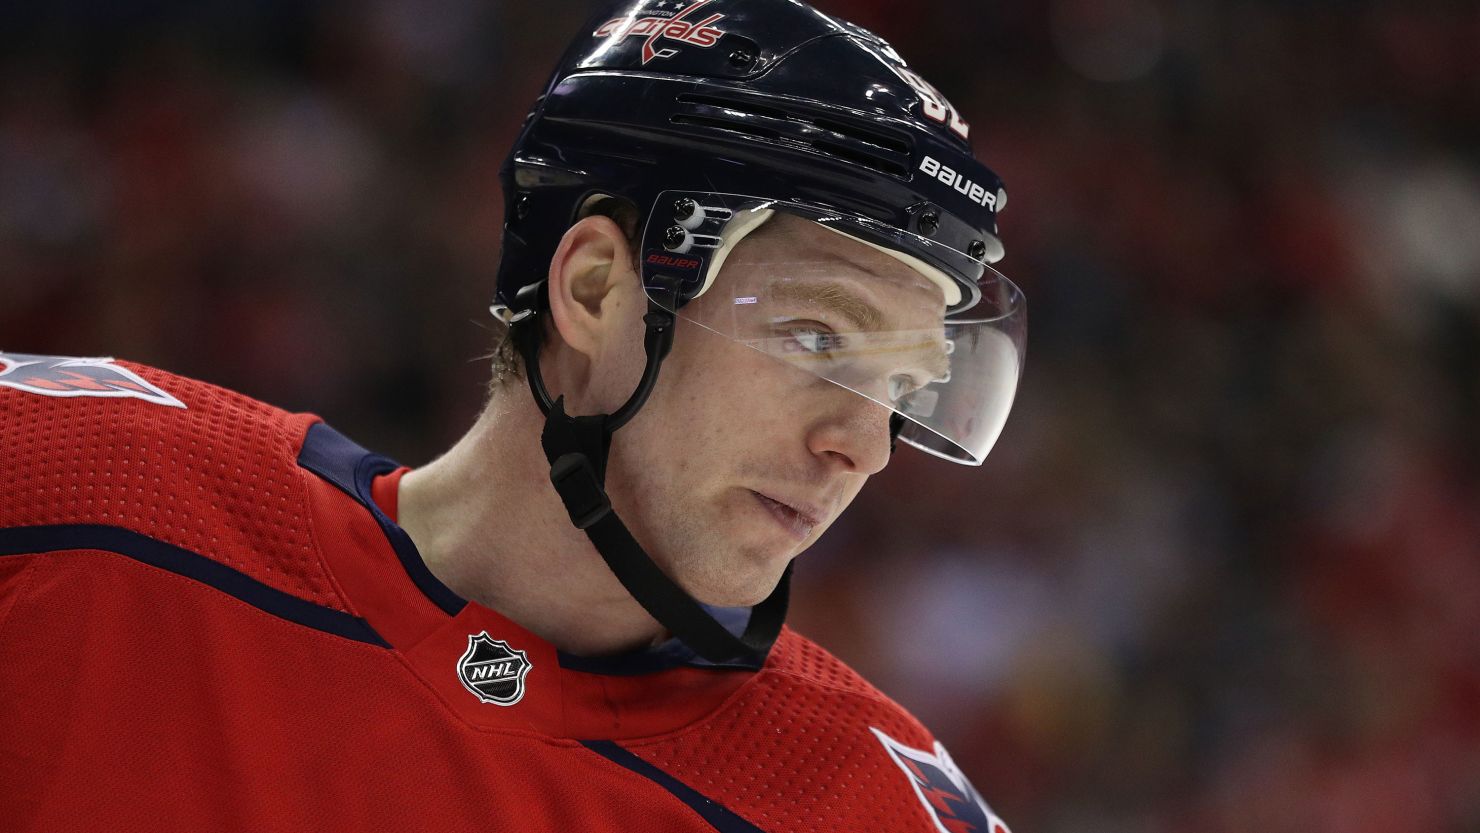 Evgeny Kuznetsov of the Washington Capitals has been suspended from international play for testing positive for cocaine.